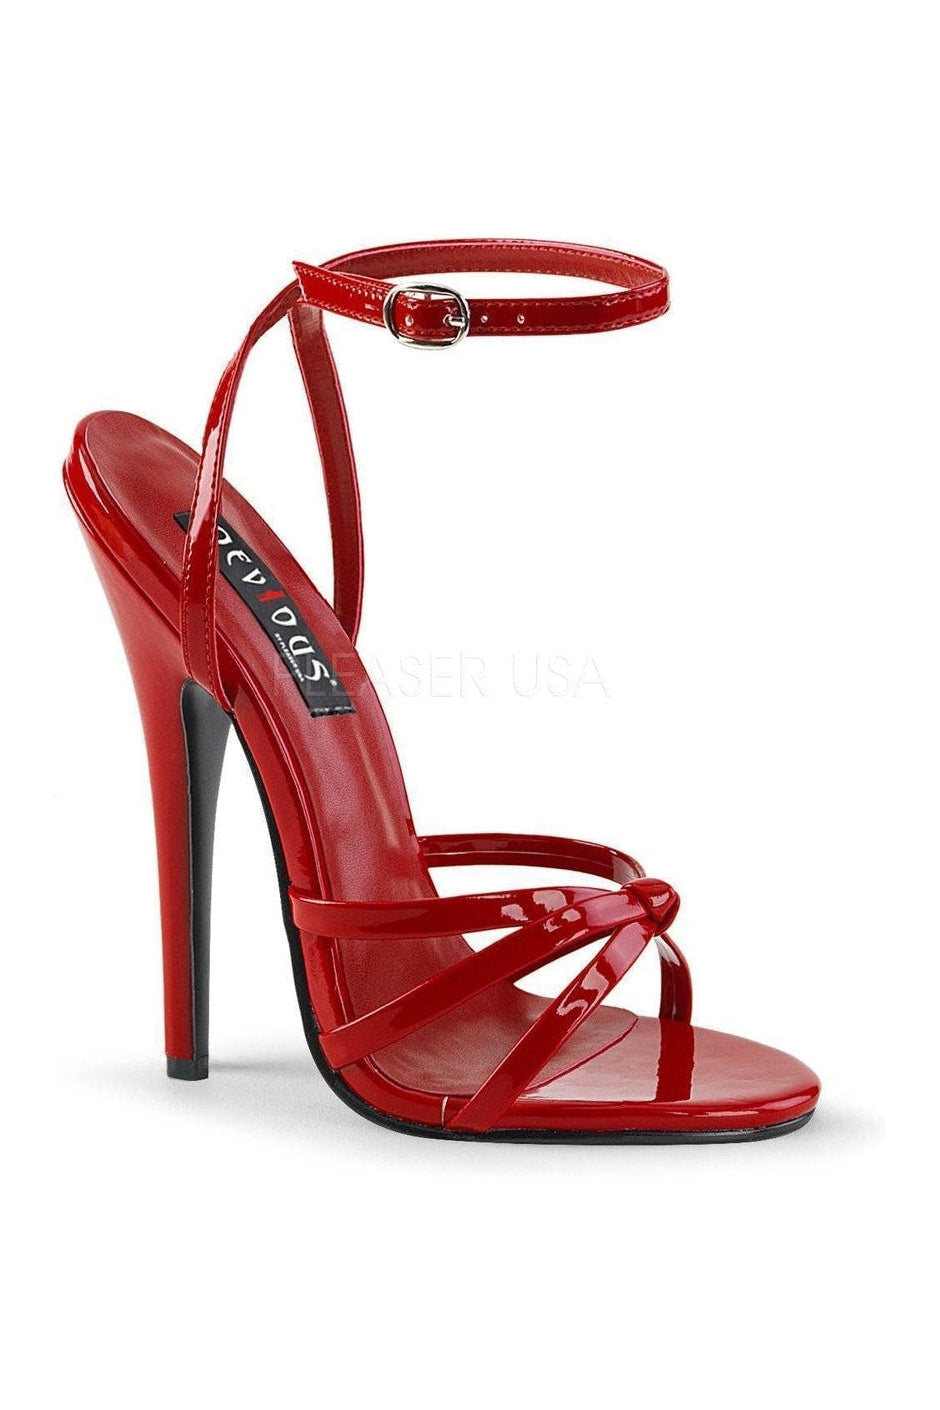 Plus Size Sexy Heels for Drag Queens 